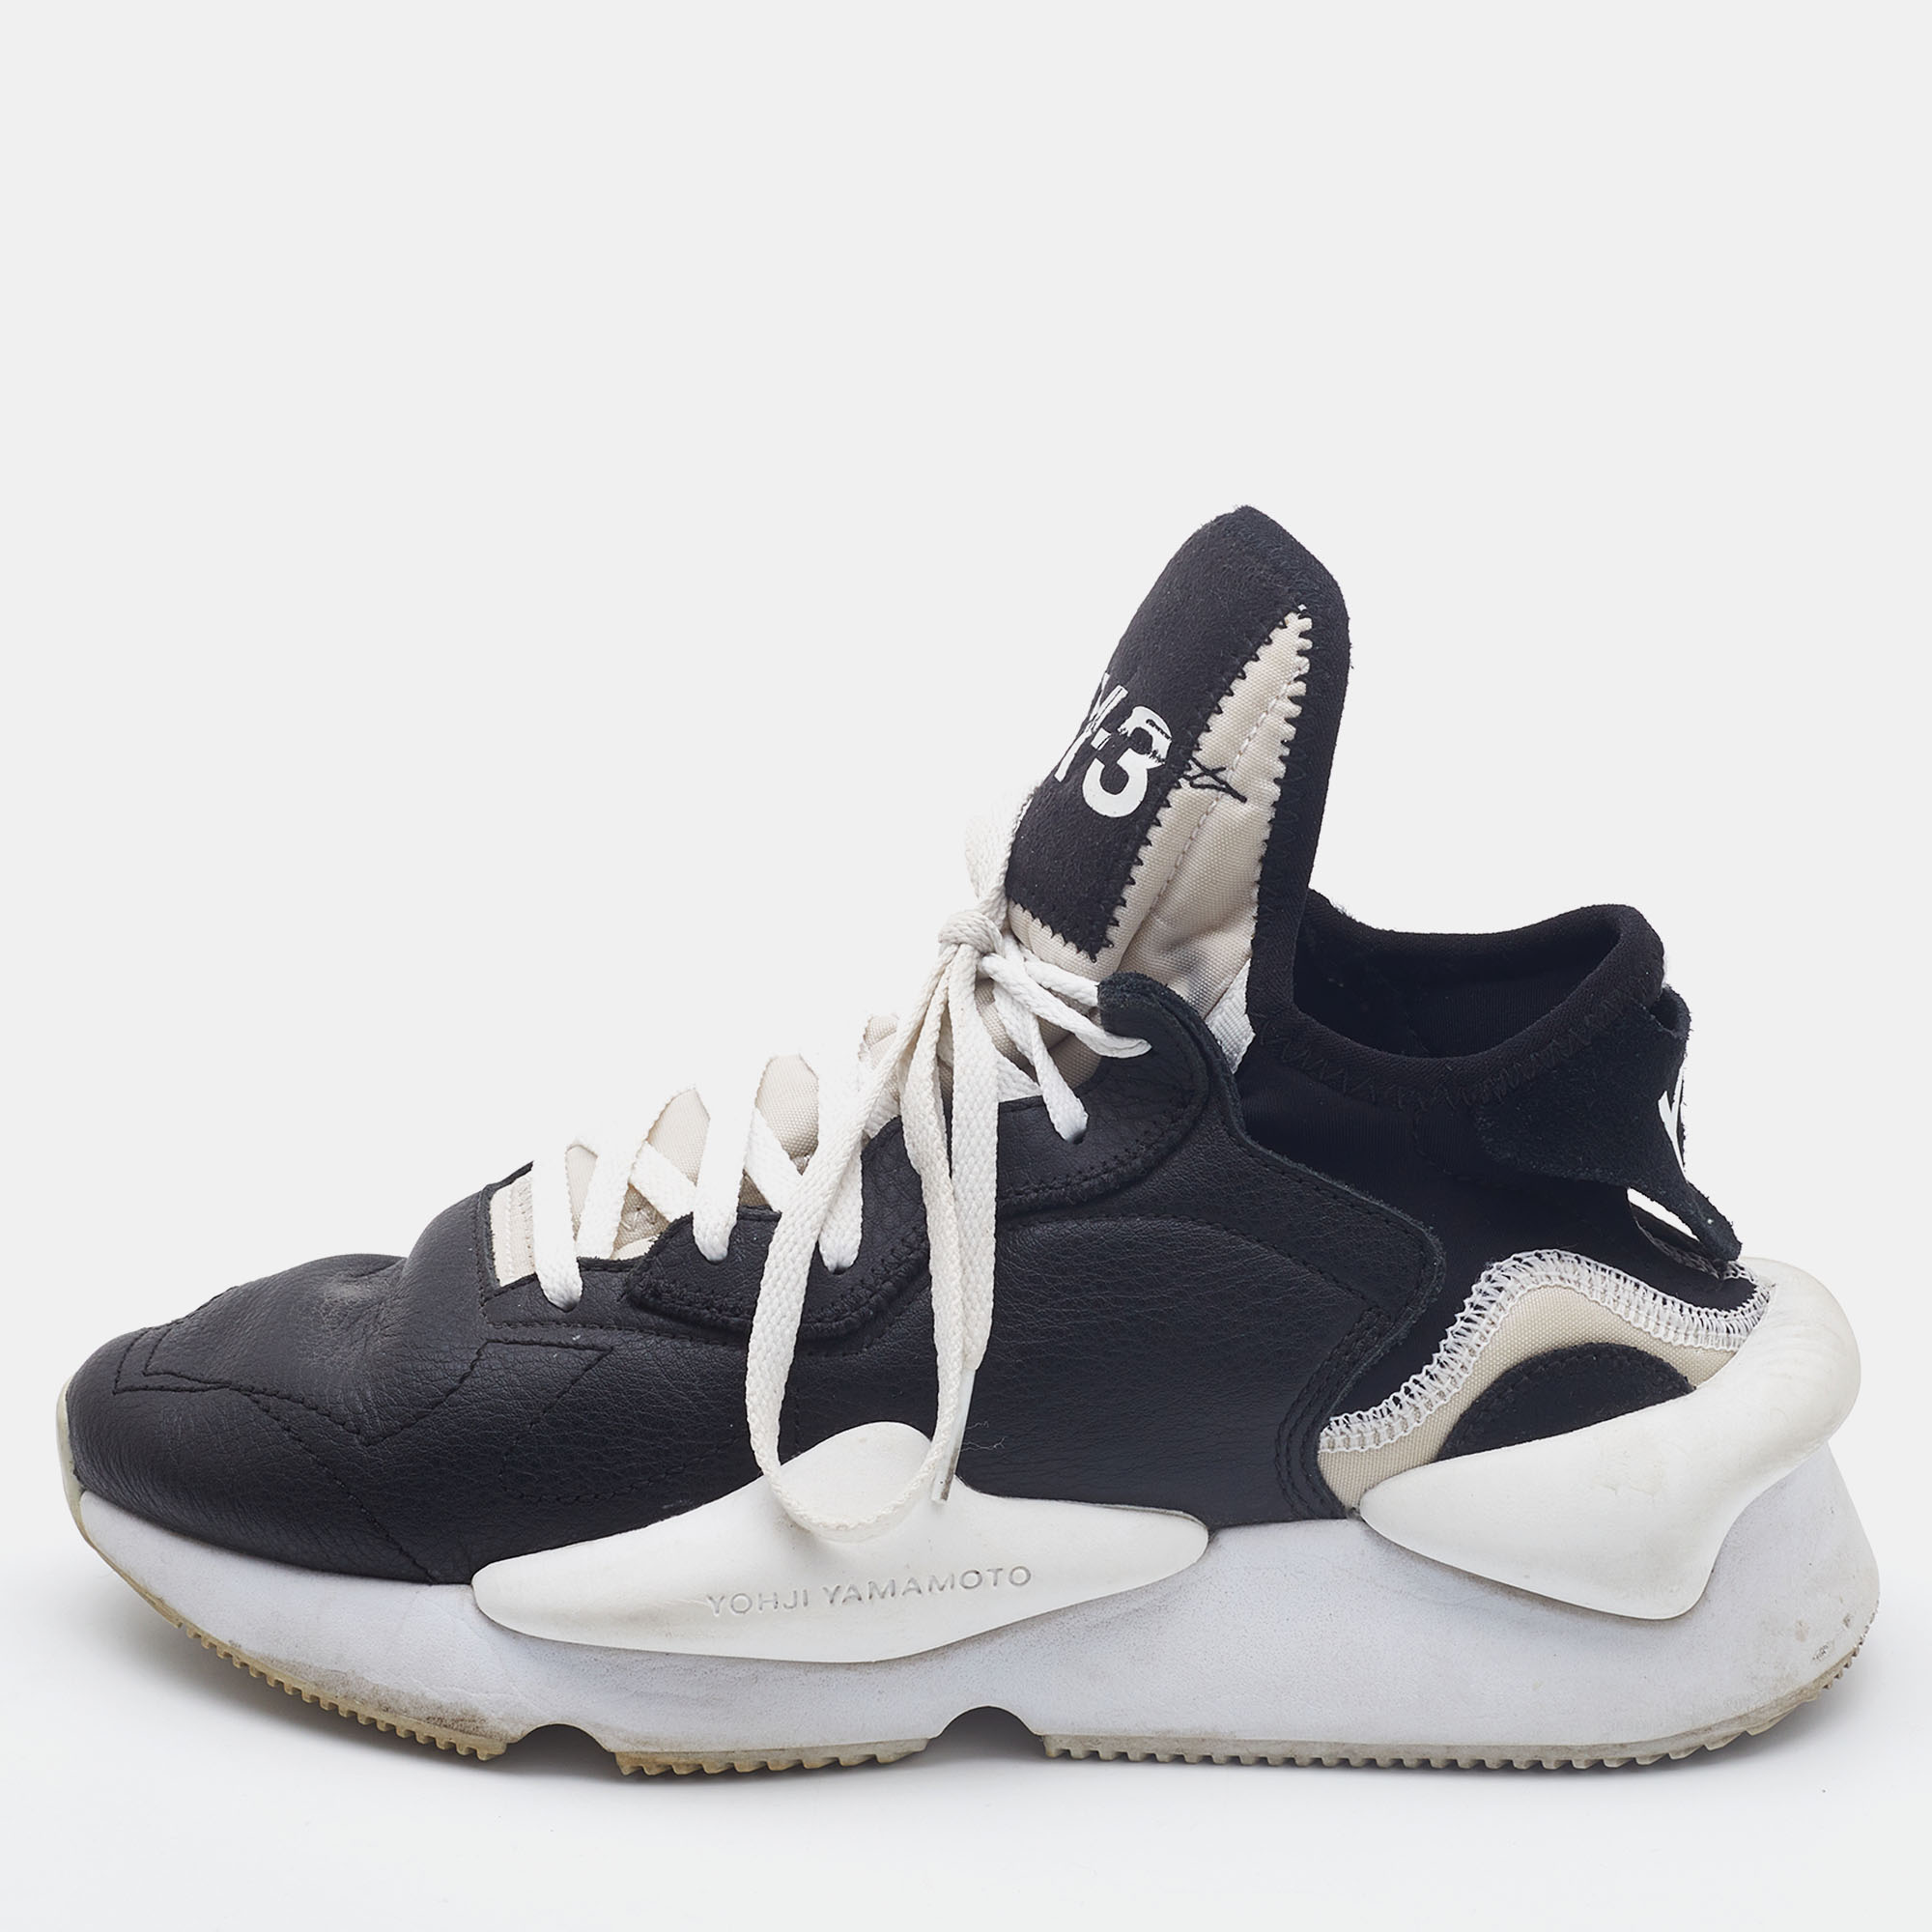 

Y-3 Black/White Leather and Fabric Kaiwa Sneakers Size